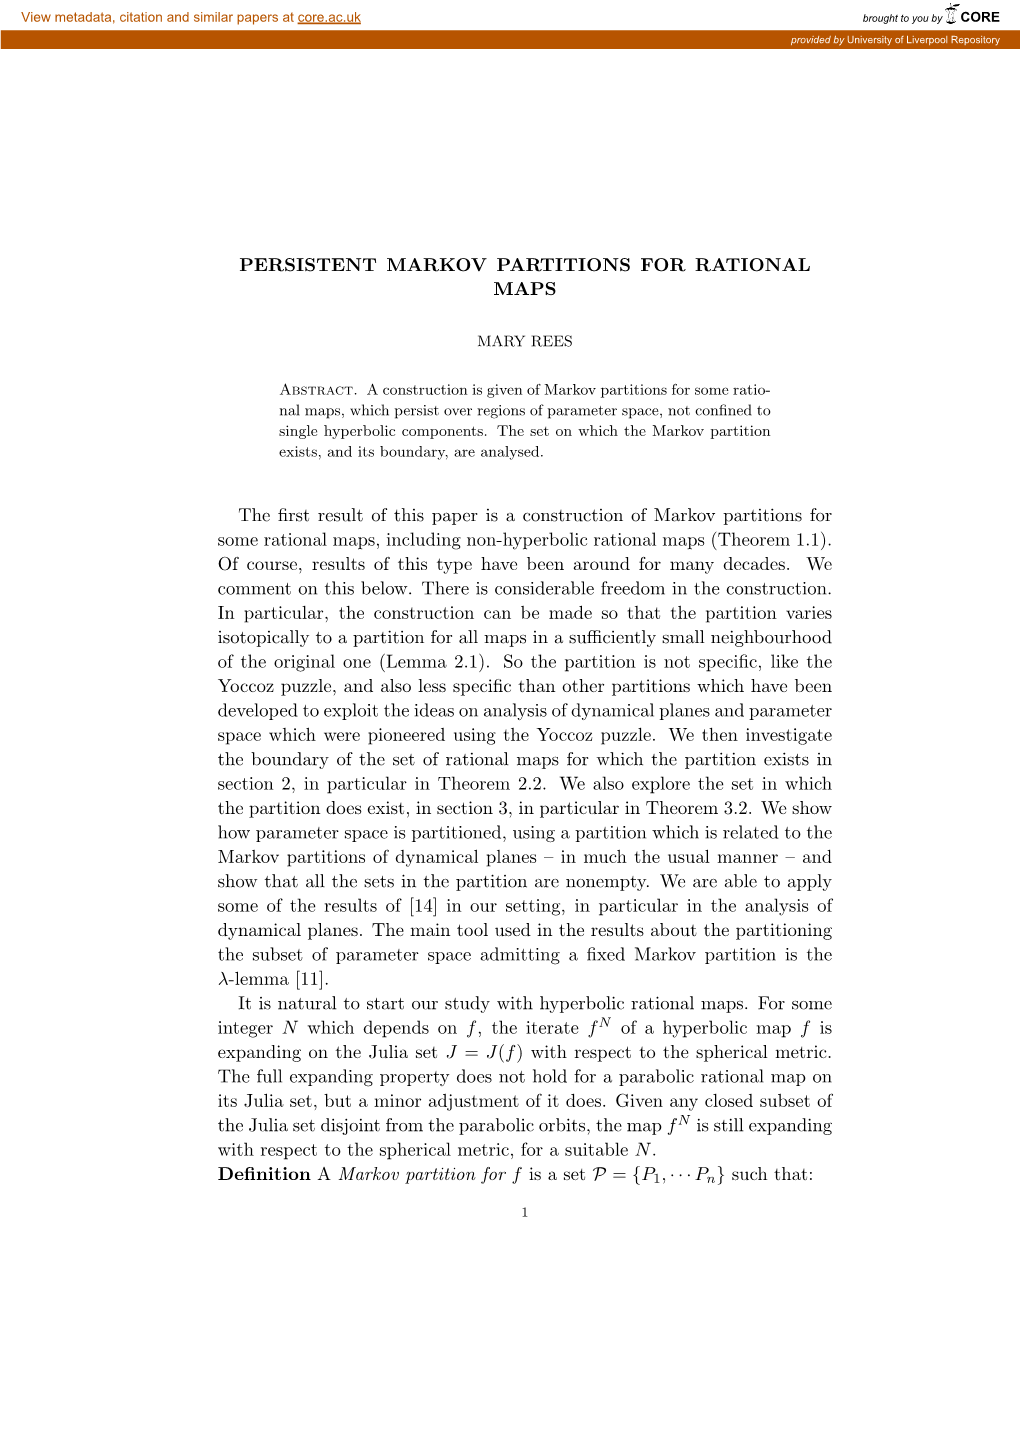 PERSISTENT MARKOV PARTITIONS for RATIONAL MAPS the First